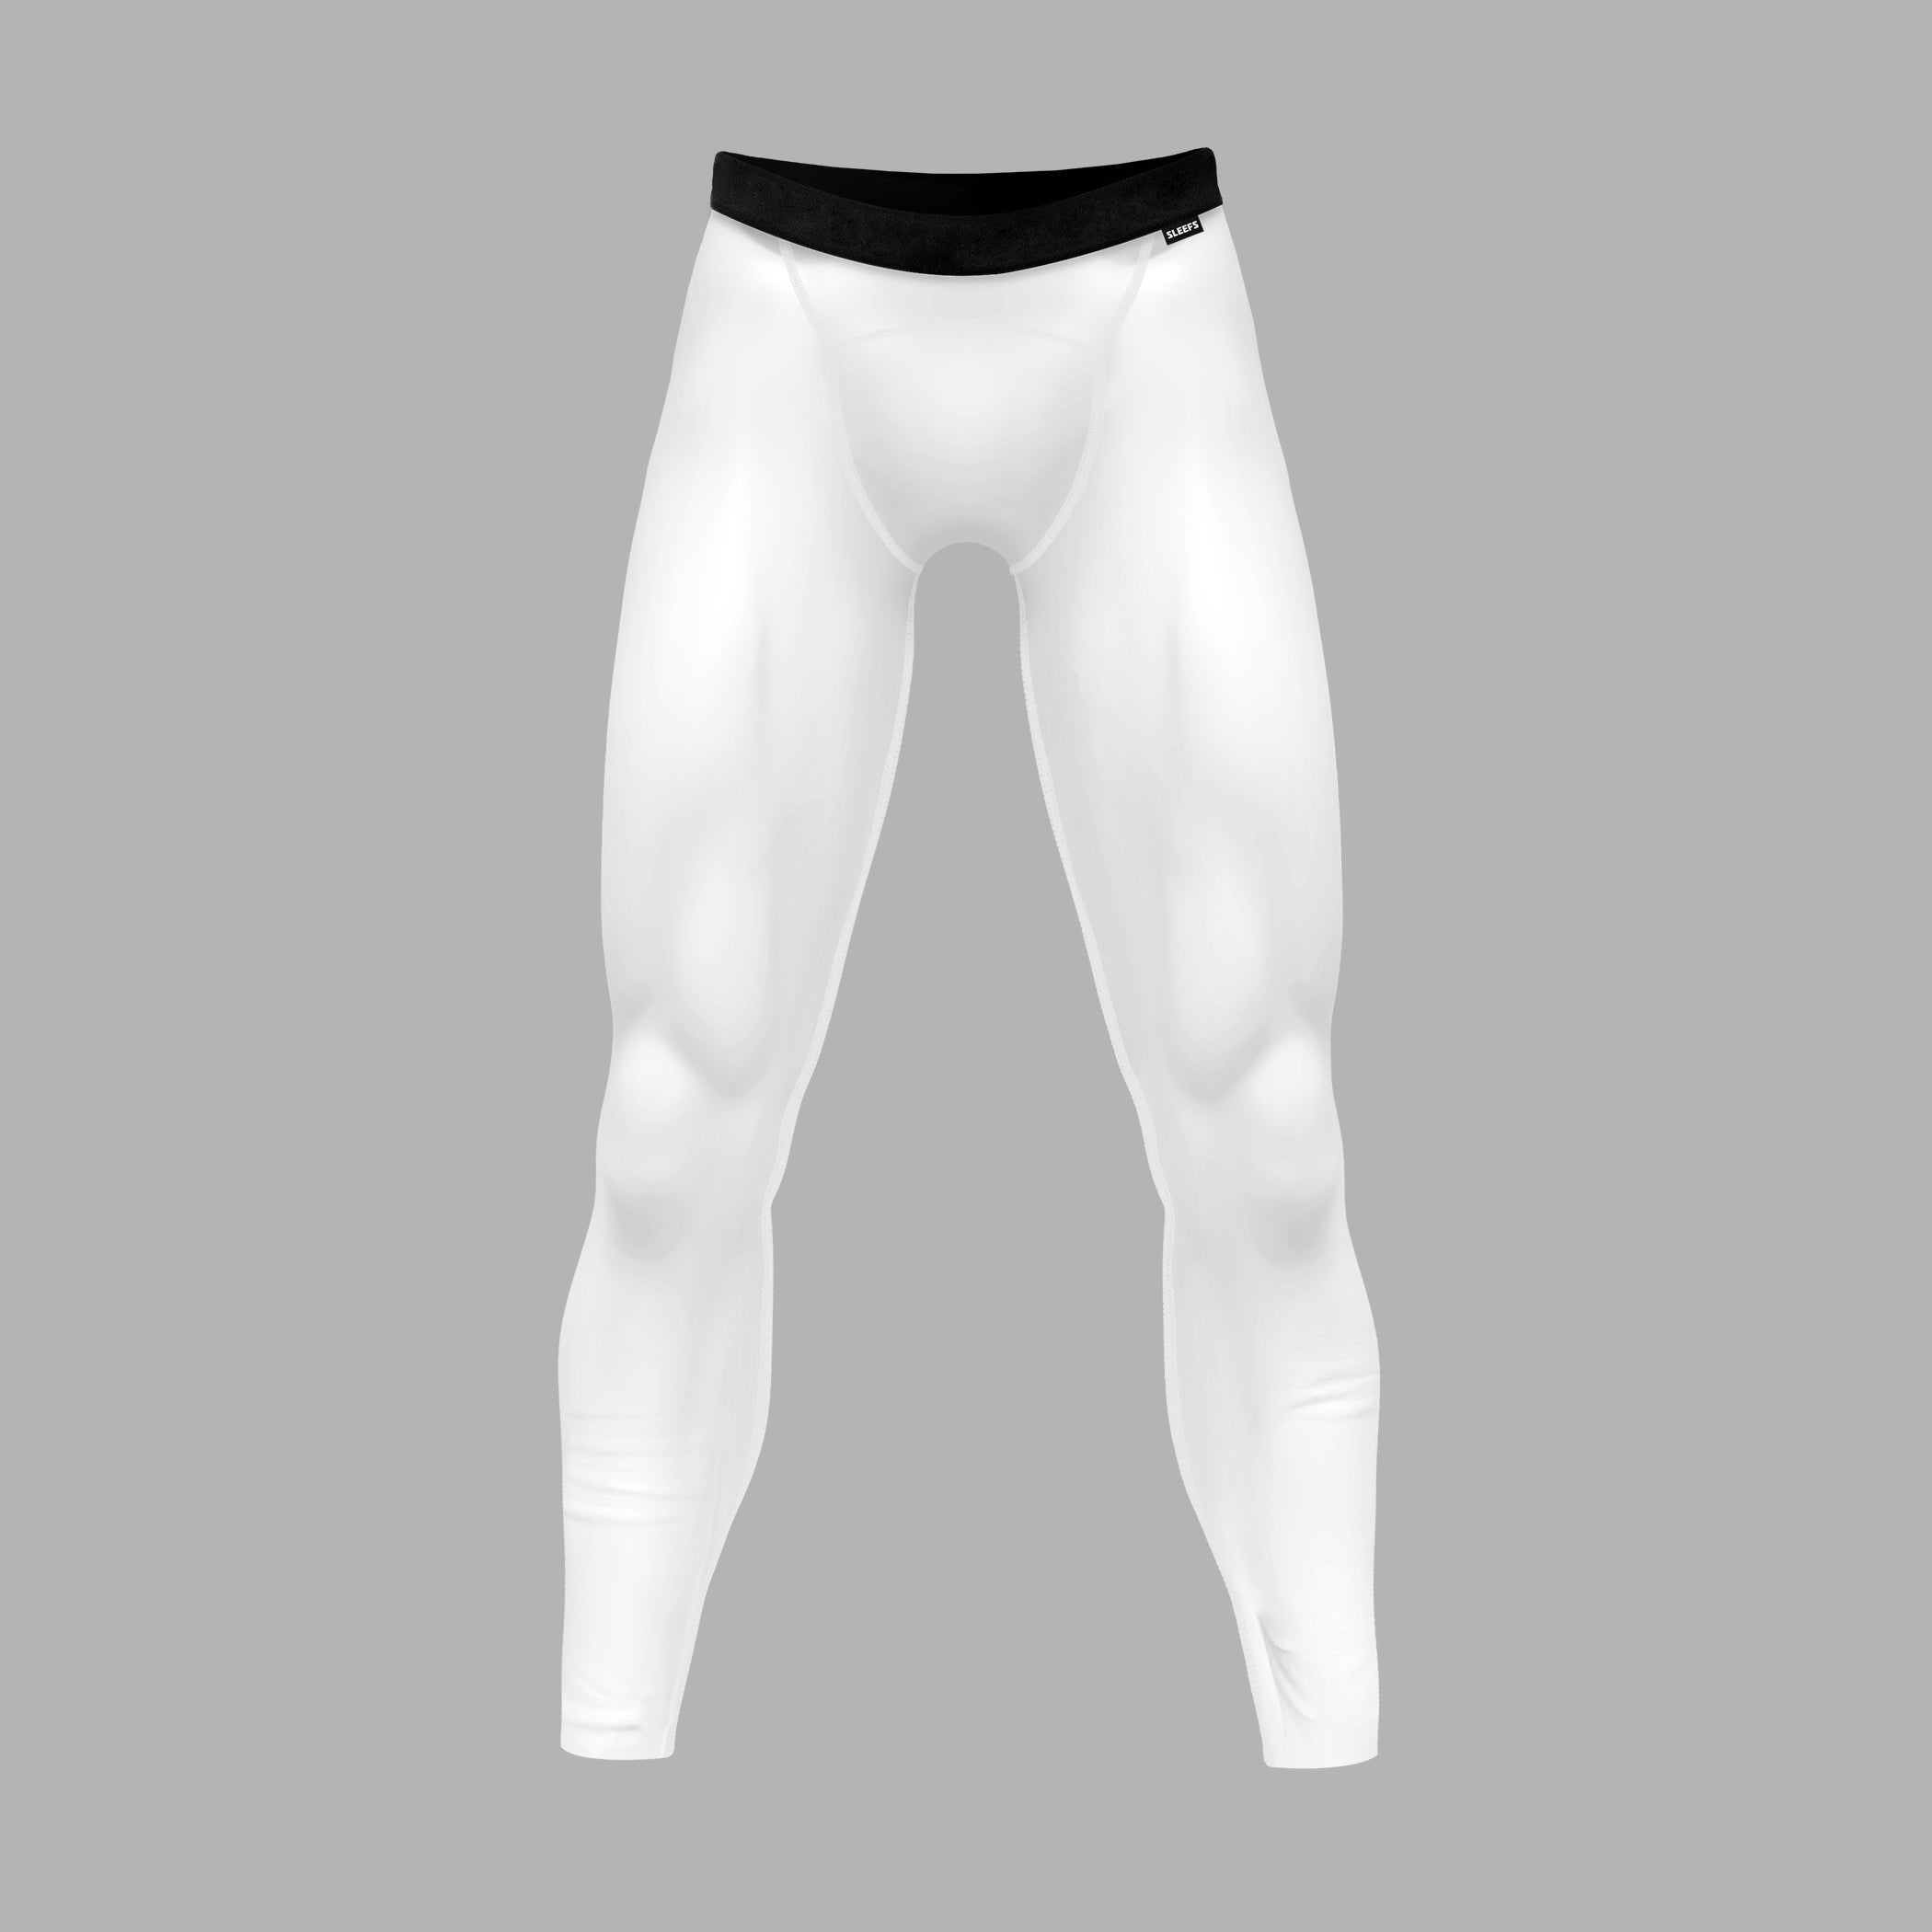 Compression Tights for Football